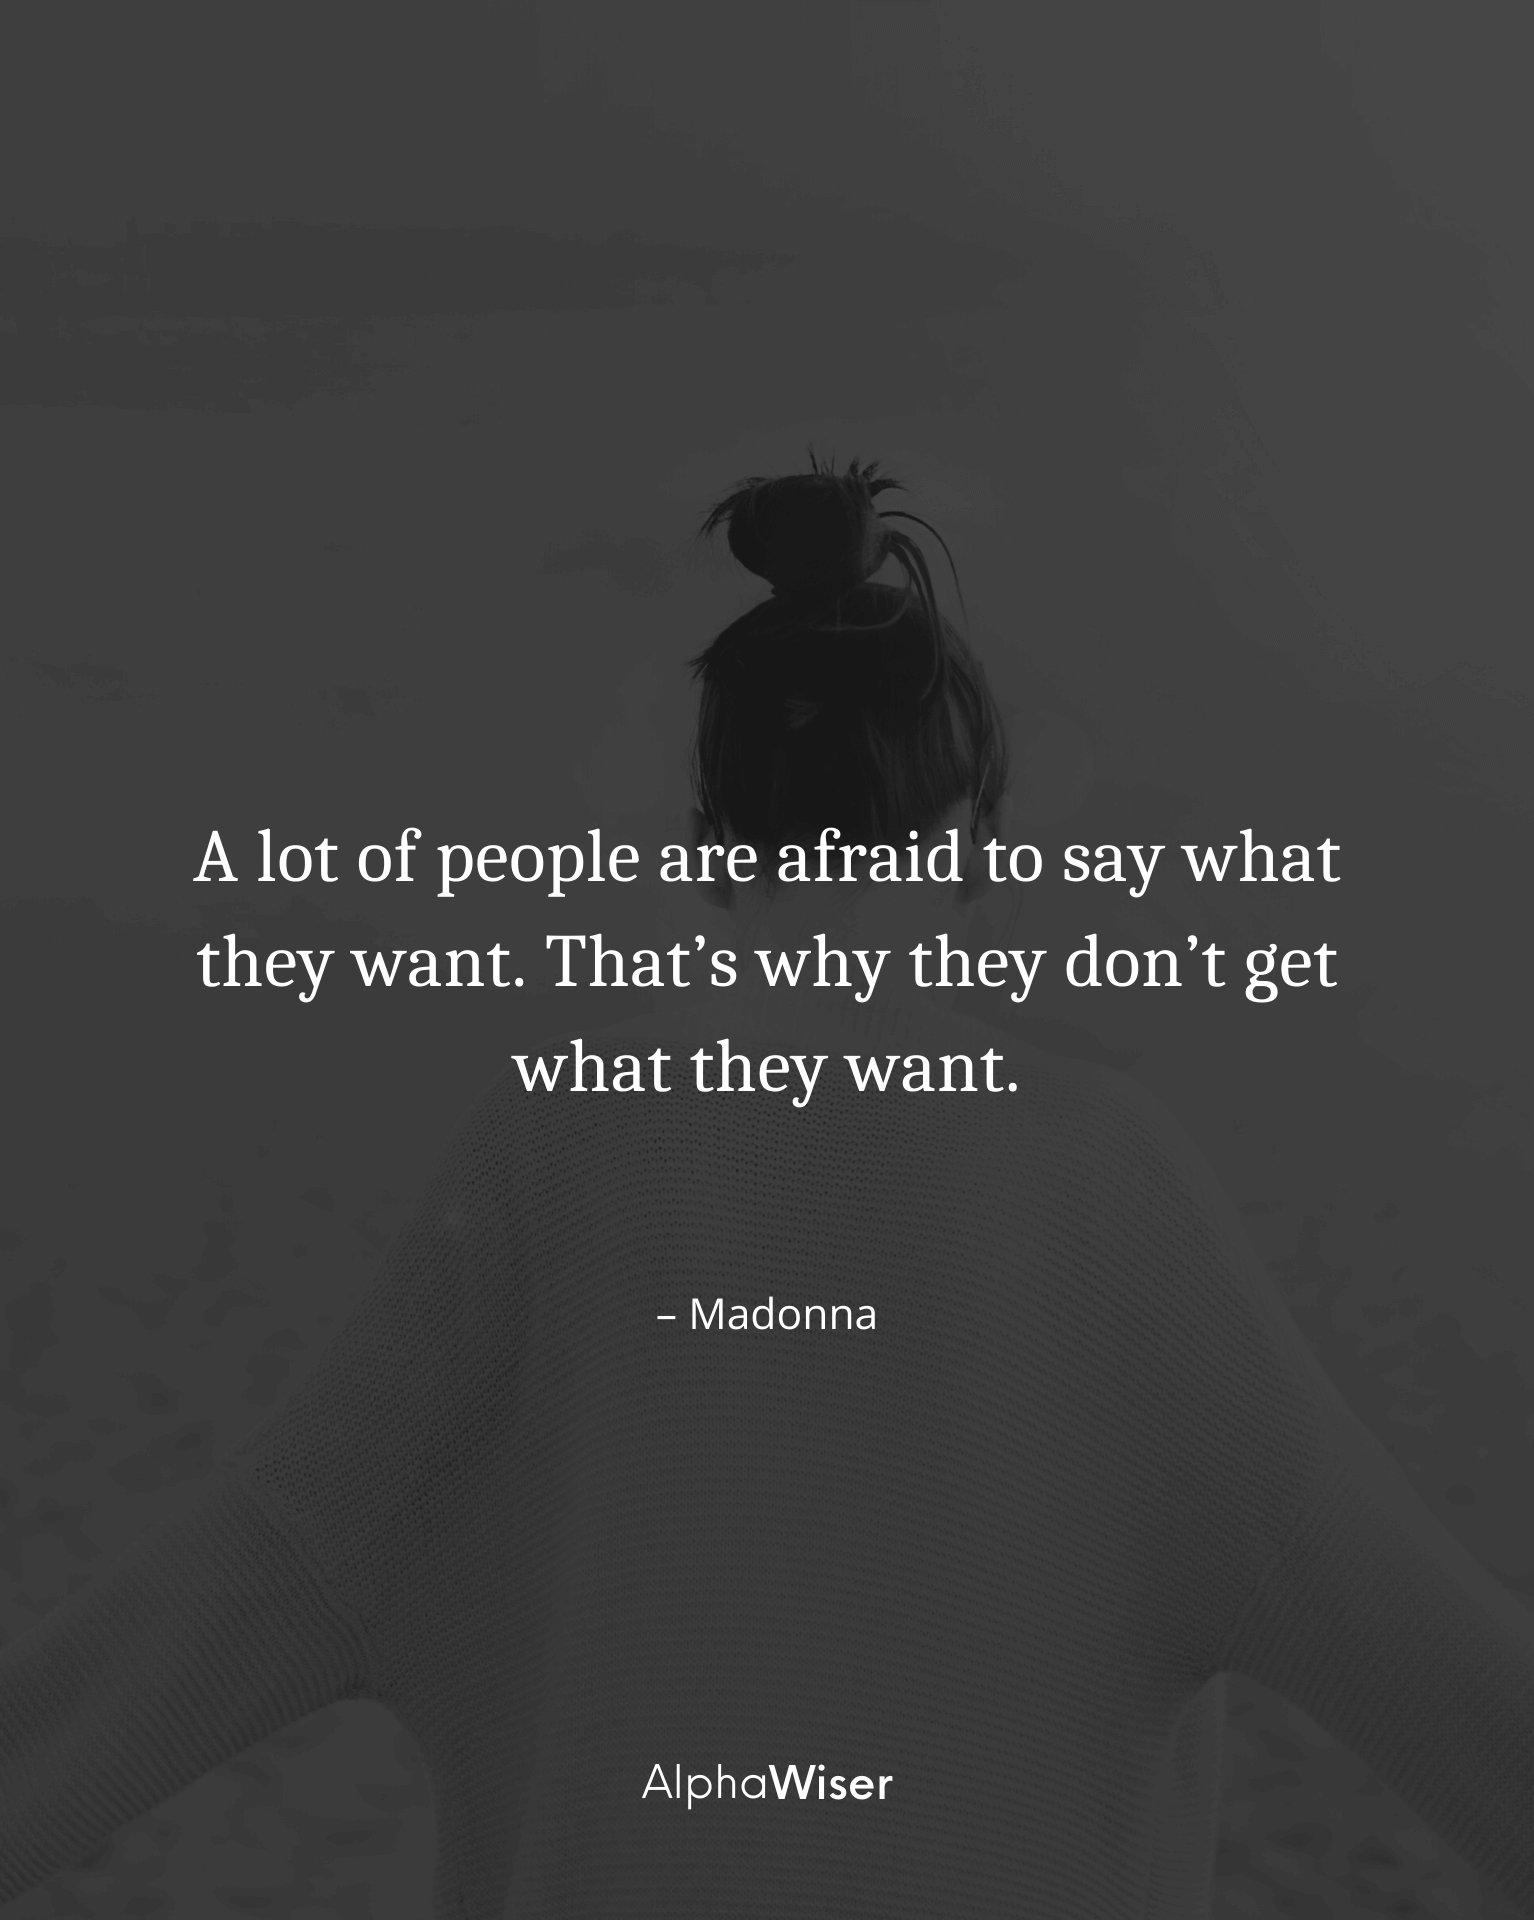 A lot of people are afraid to say what they want. That’s why they don’t get what they want.